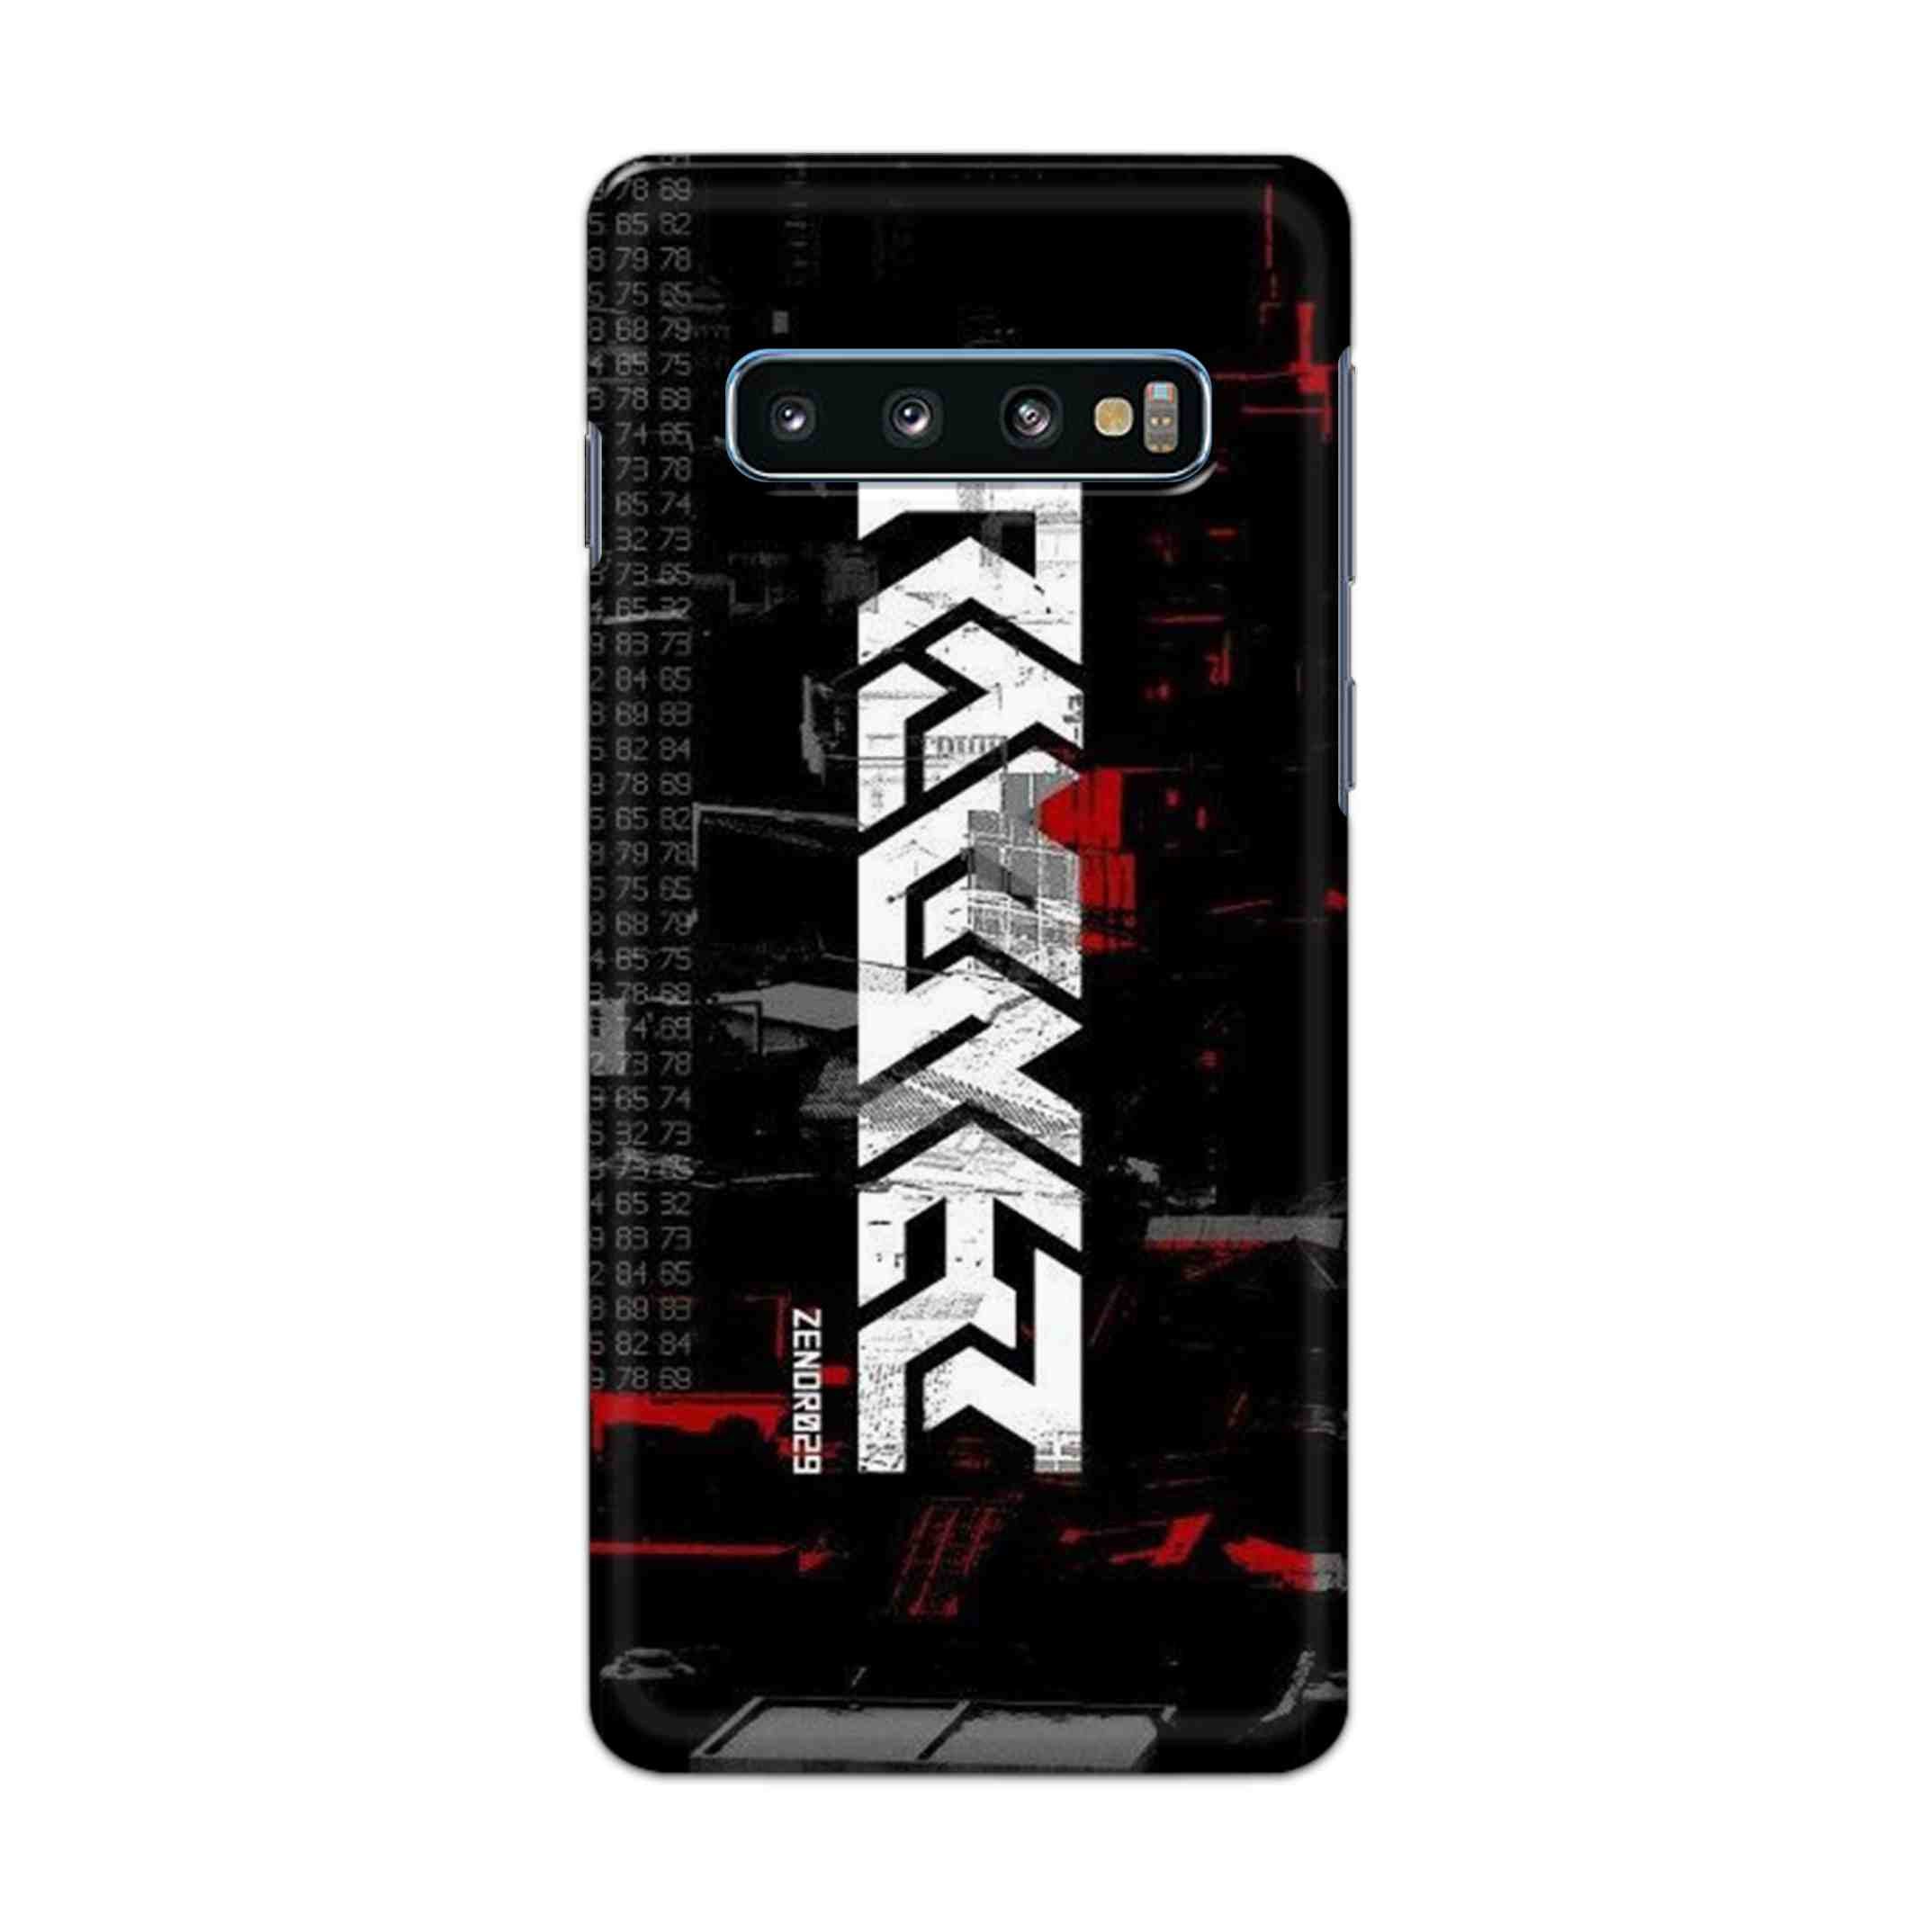 Buy Raxer Hard Back Mobile Phone Case Cover For Samsung Galaxy S10 Plus Online